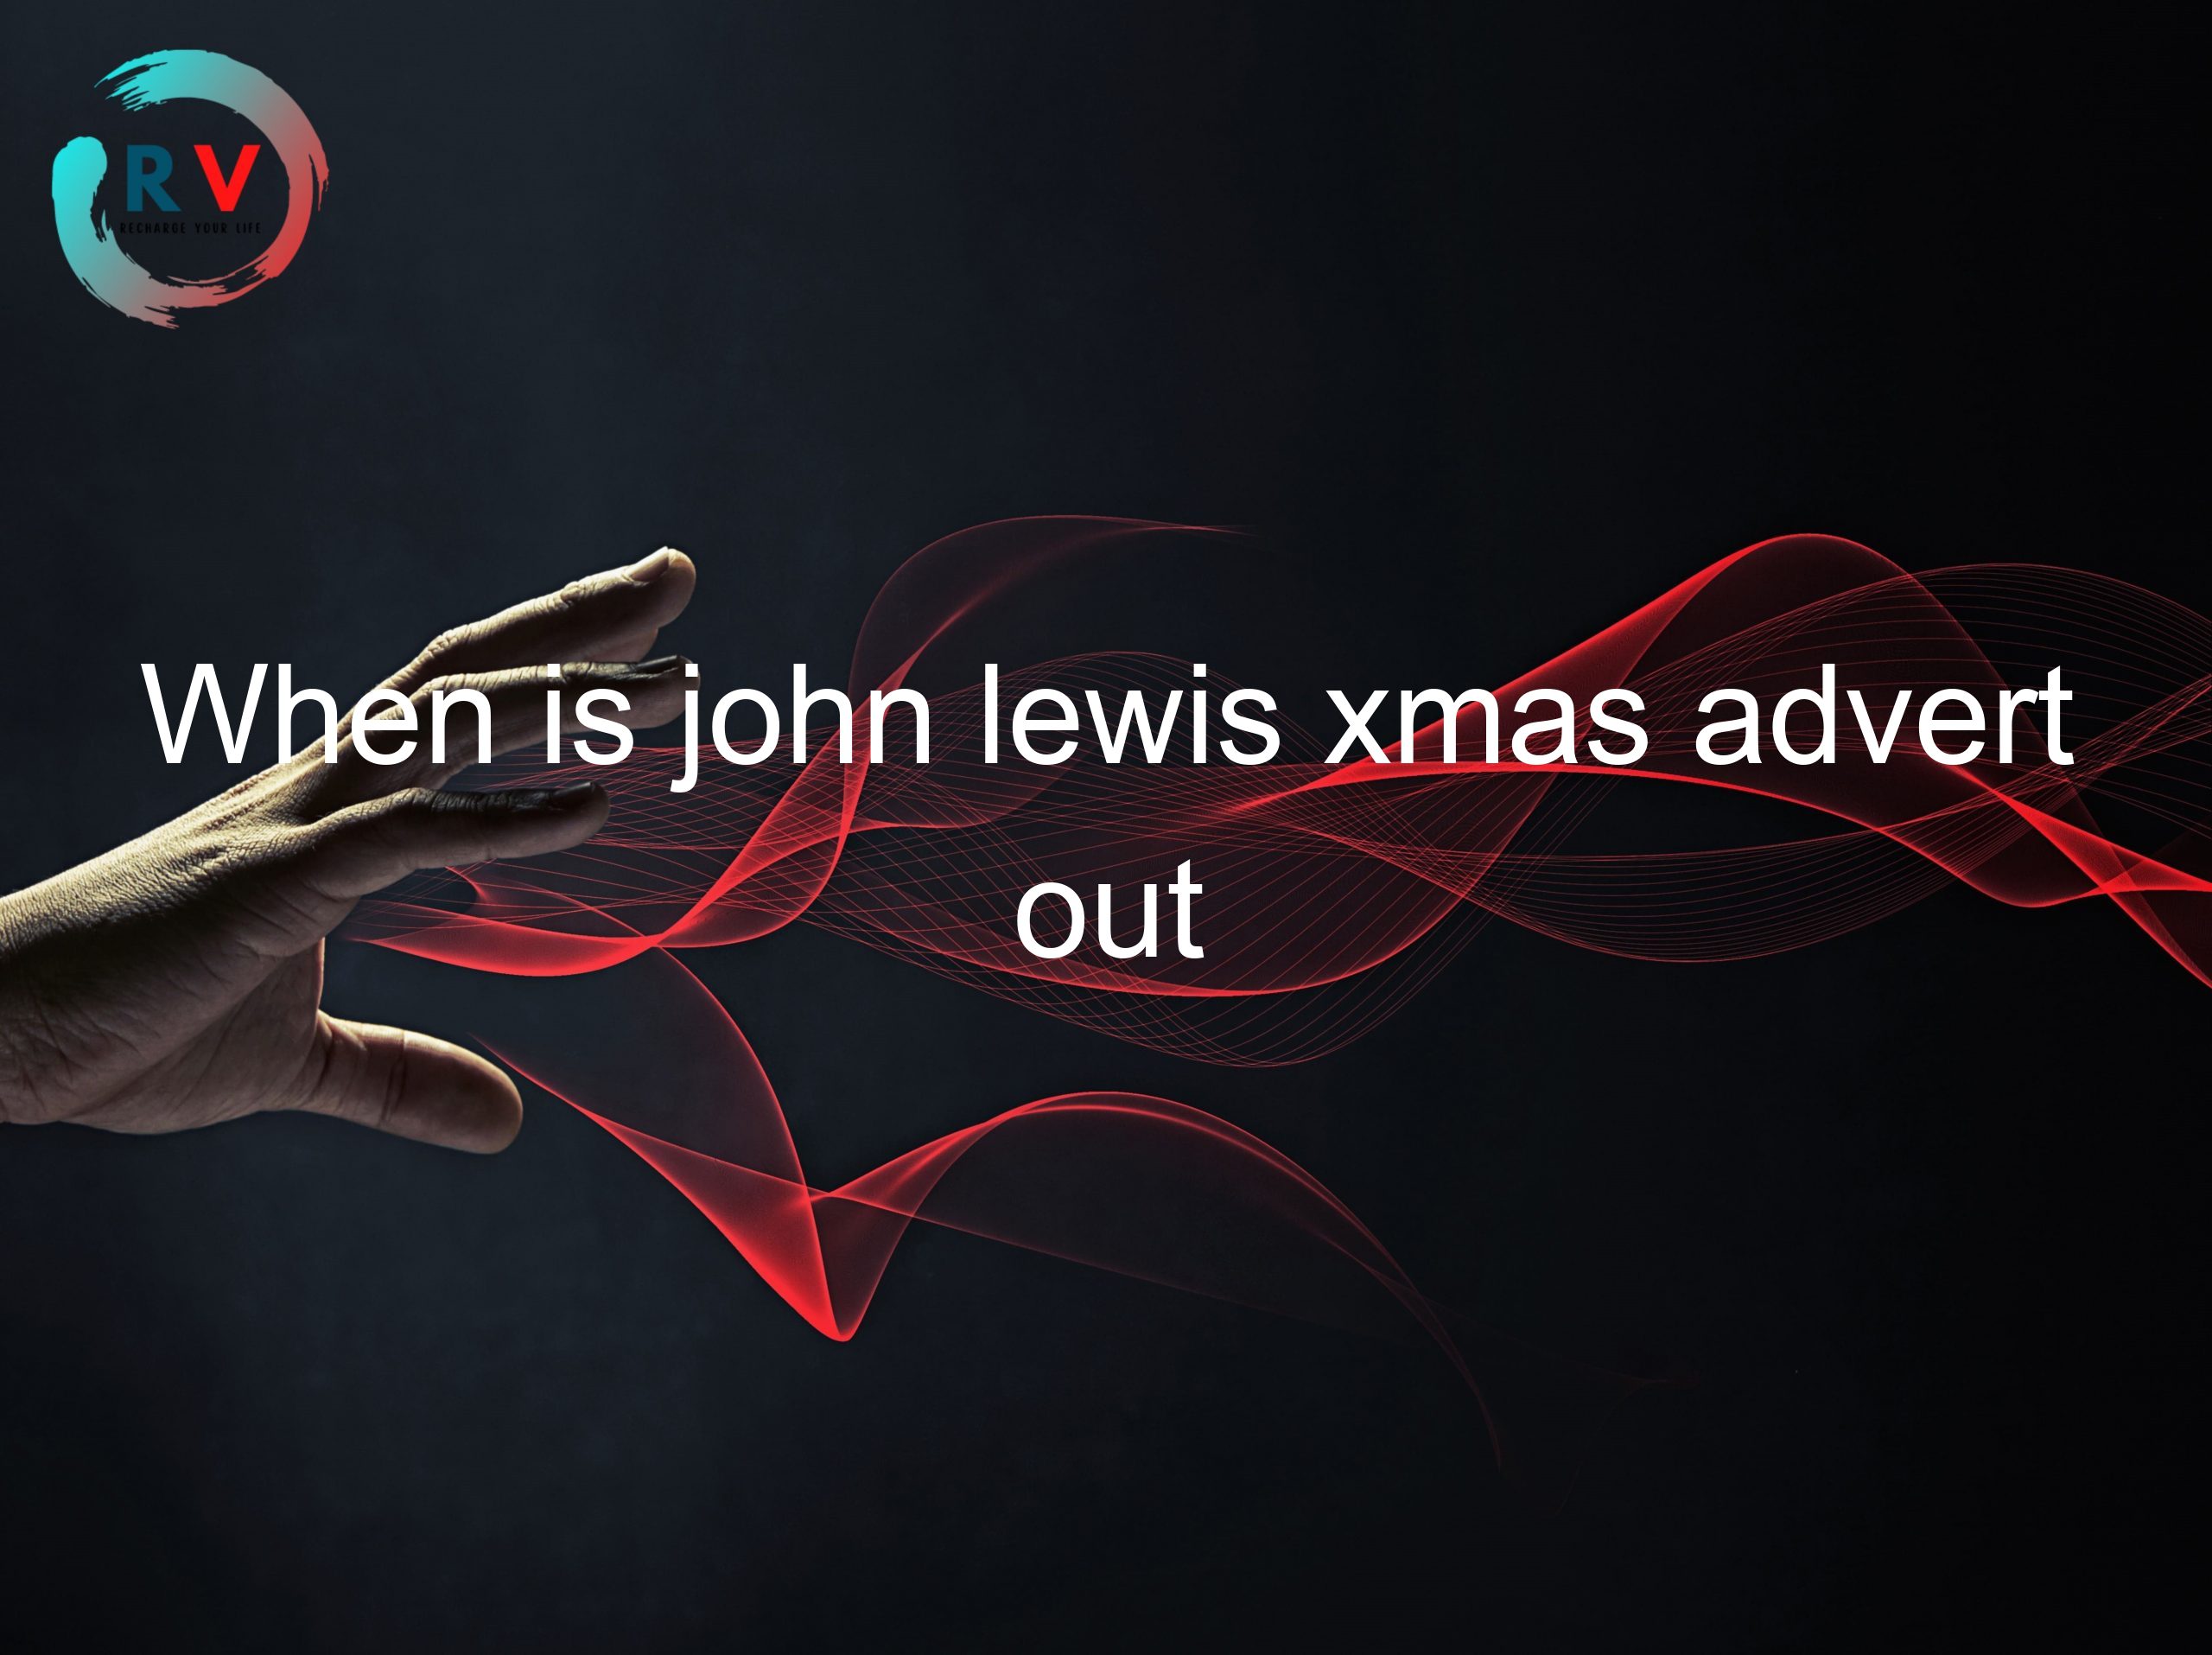 When is john lewis xmas advert out